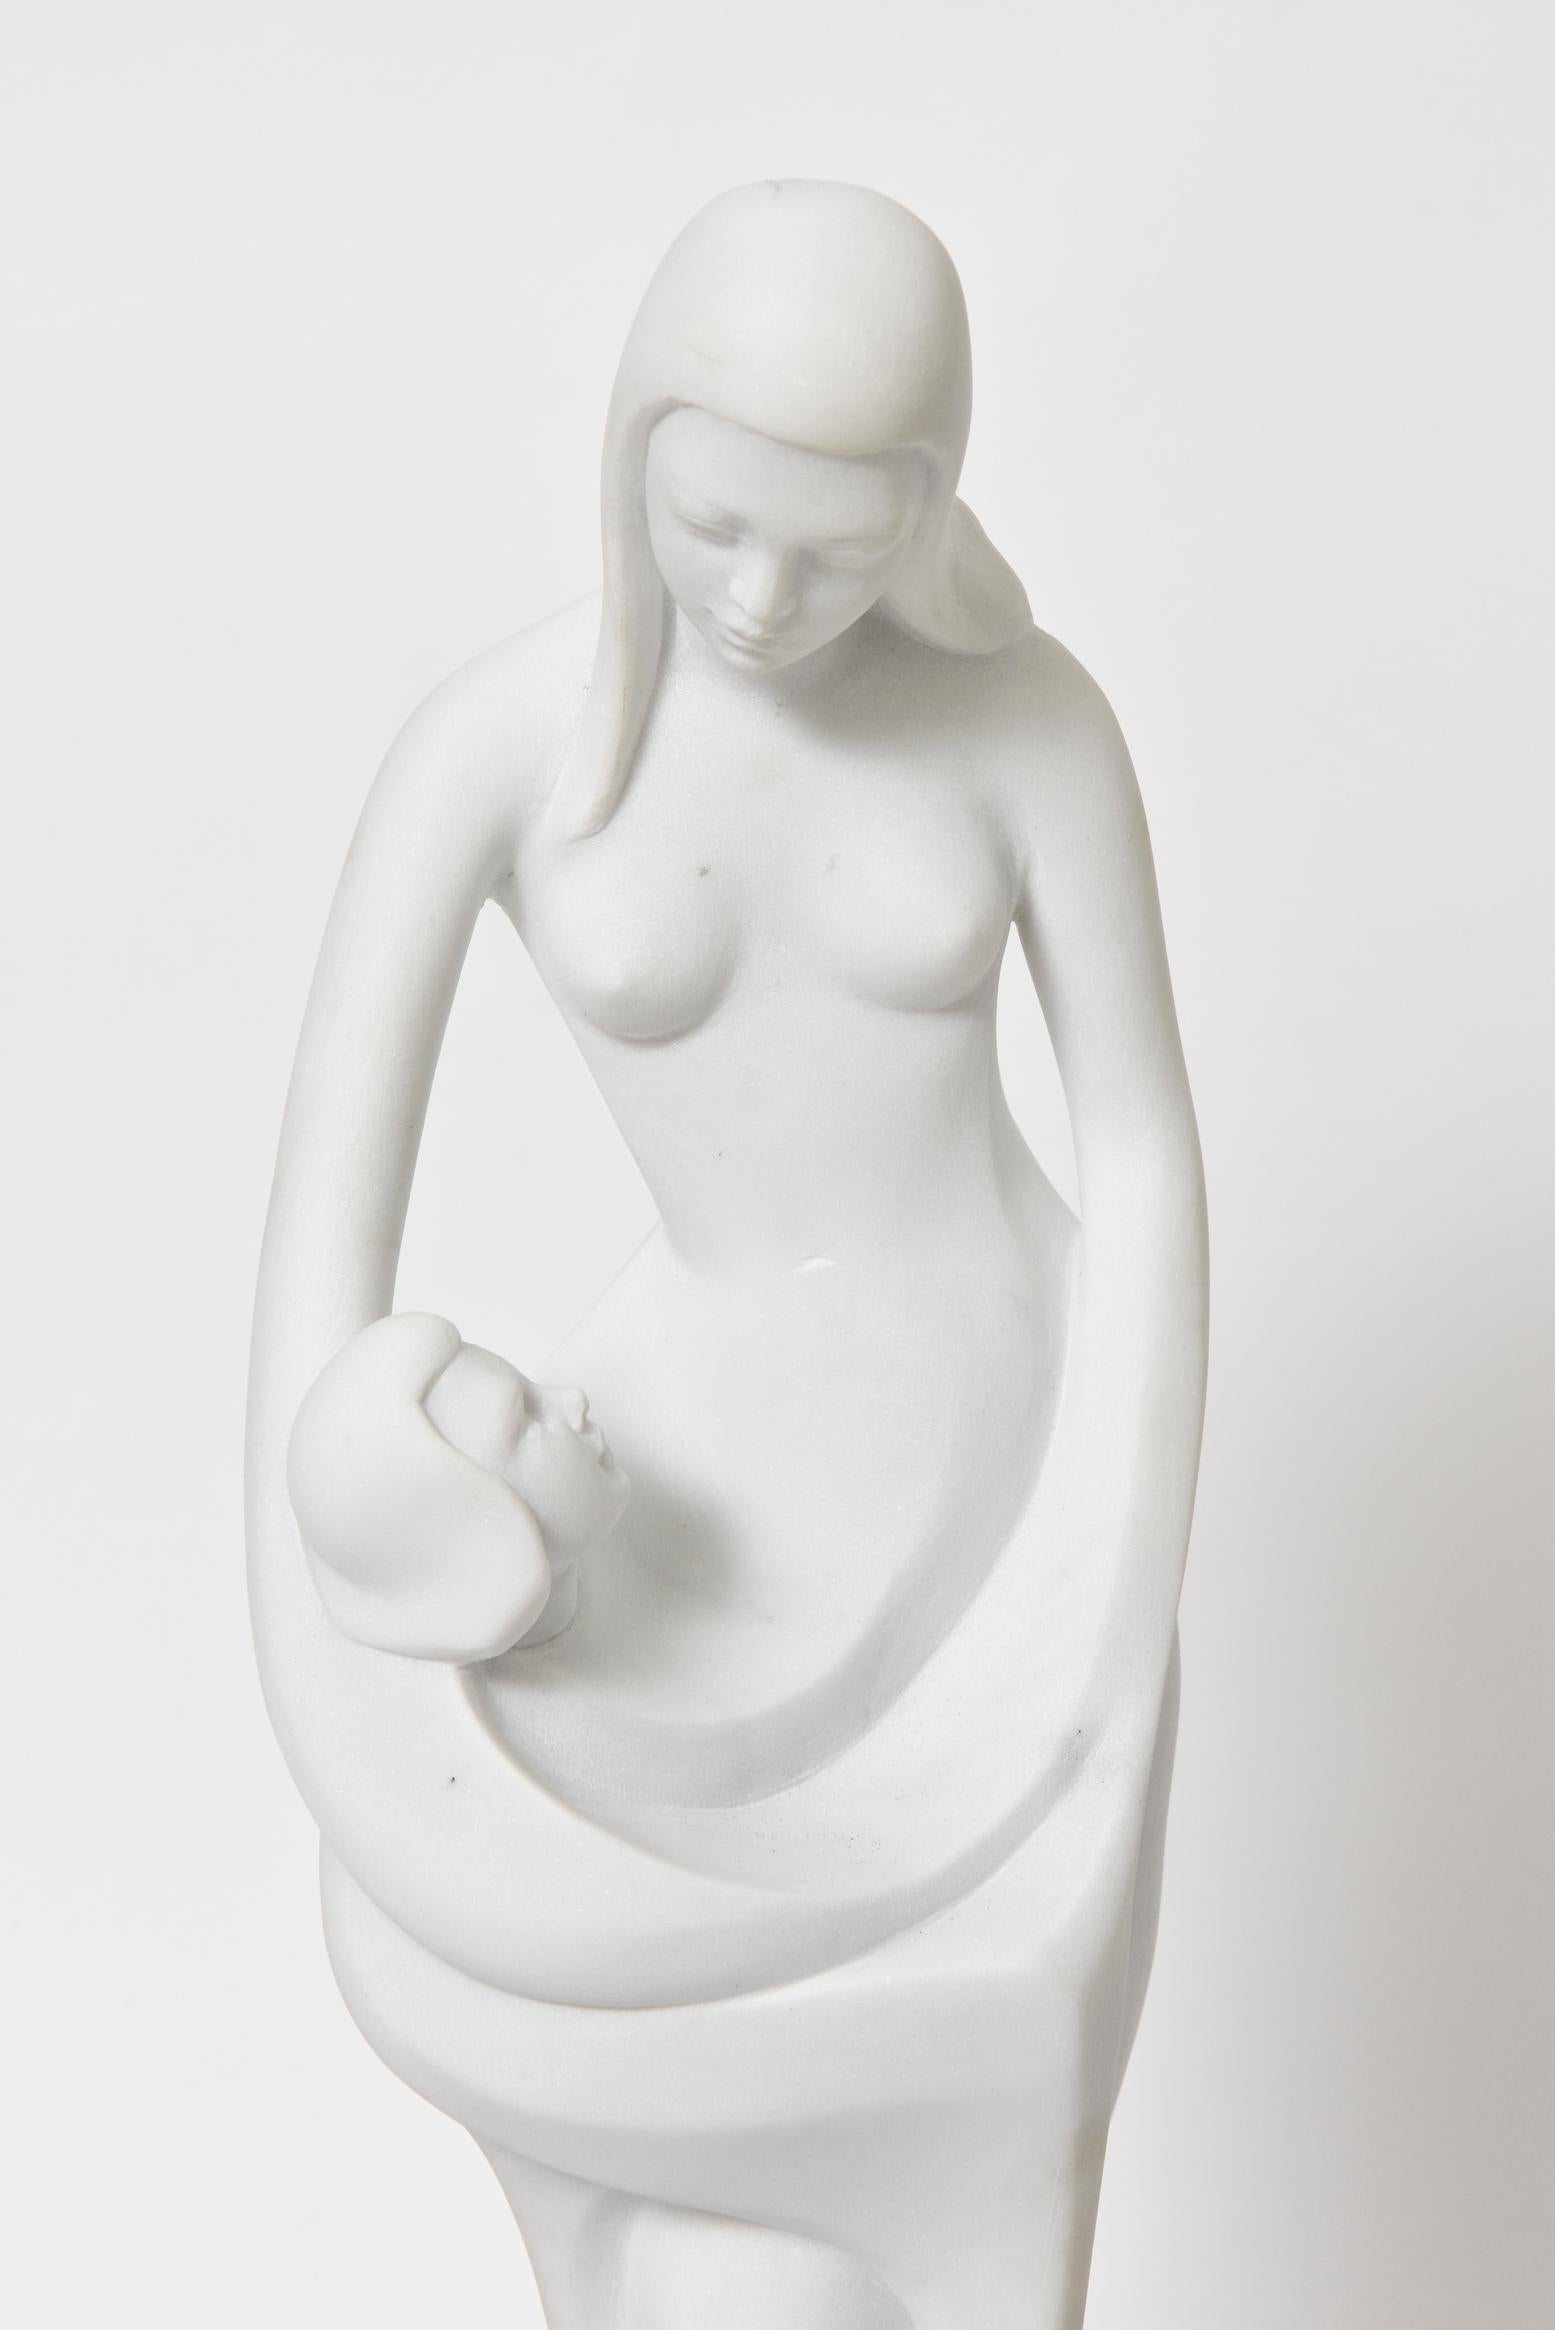 Enzo Gallo carved this abstract marble sculpture of a child intertwined in its mother's body. 

Enzo Gallo (b. 1927 Italy) is a visual artist who has worked primarily in Marble and Bronze. He is considered a master Sculptor, and has had a number